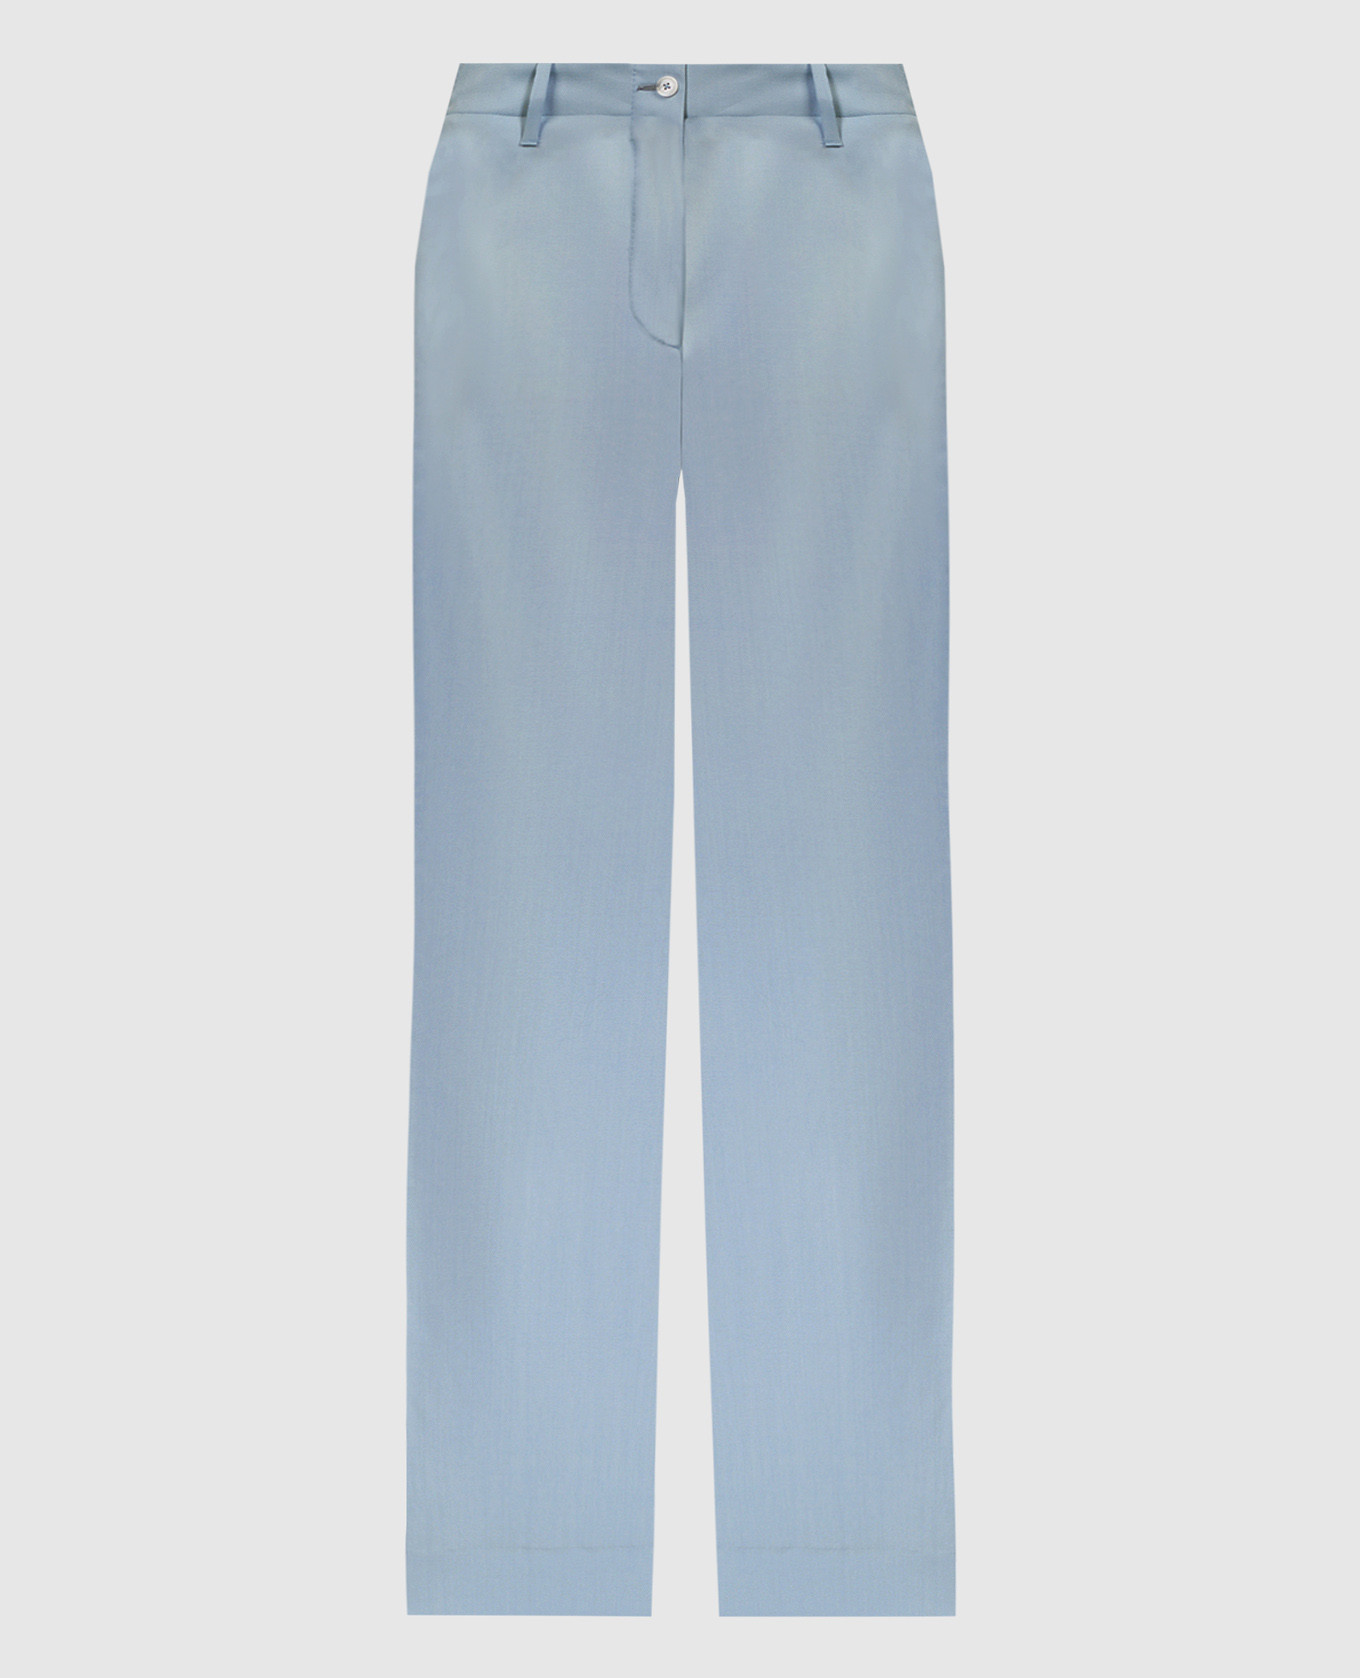 CANNES blue wool flared pants